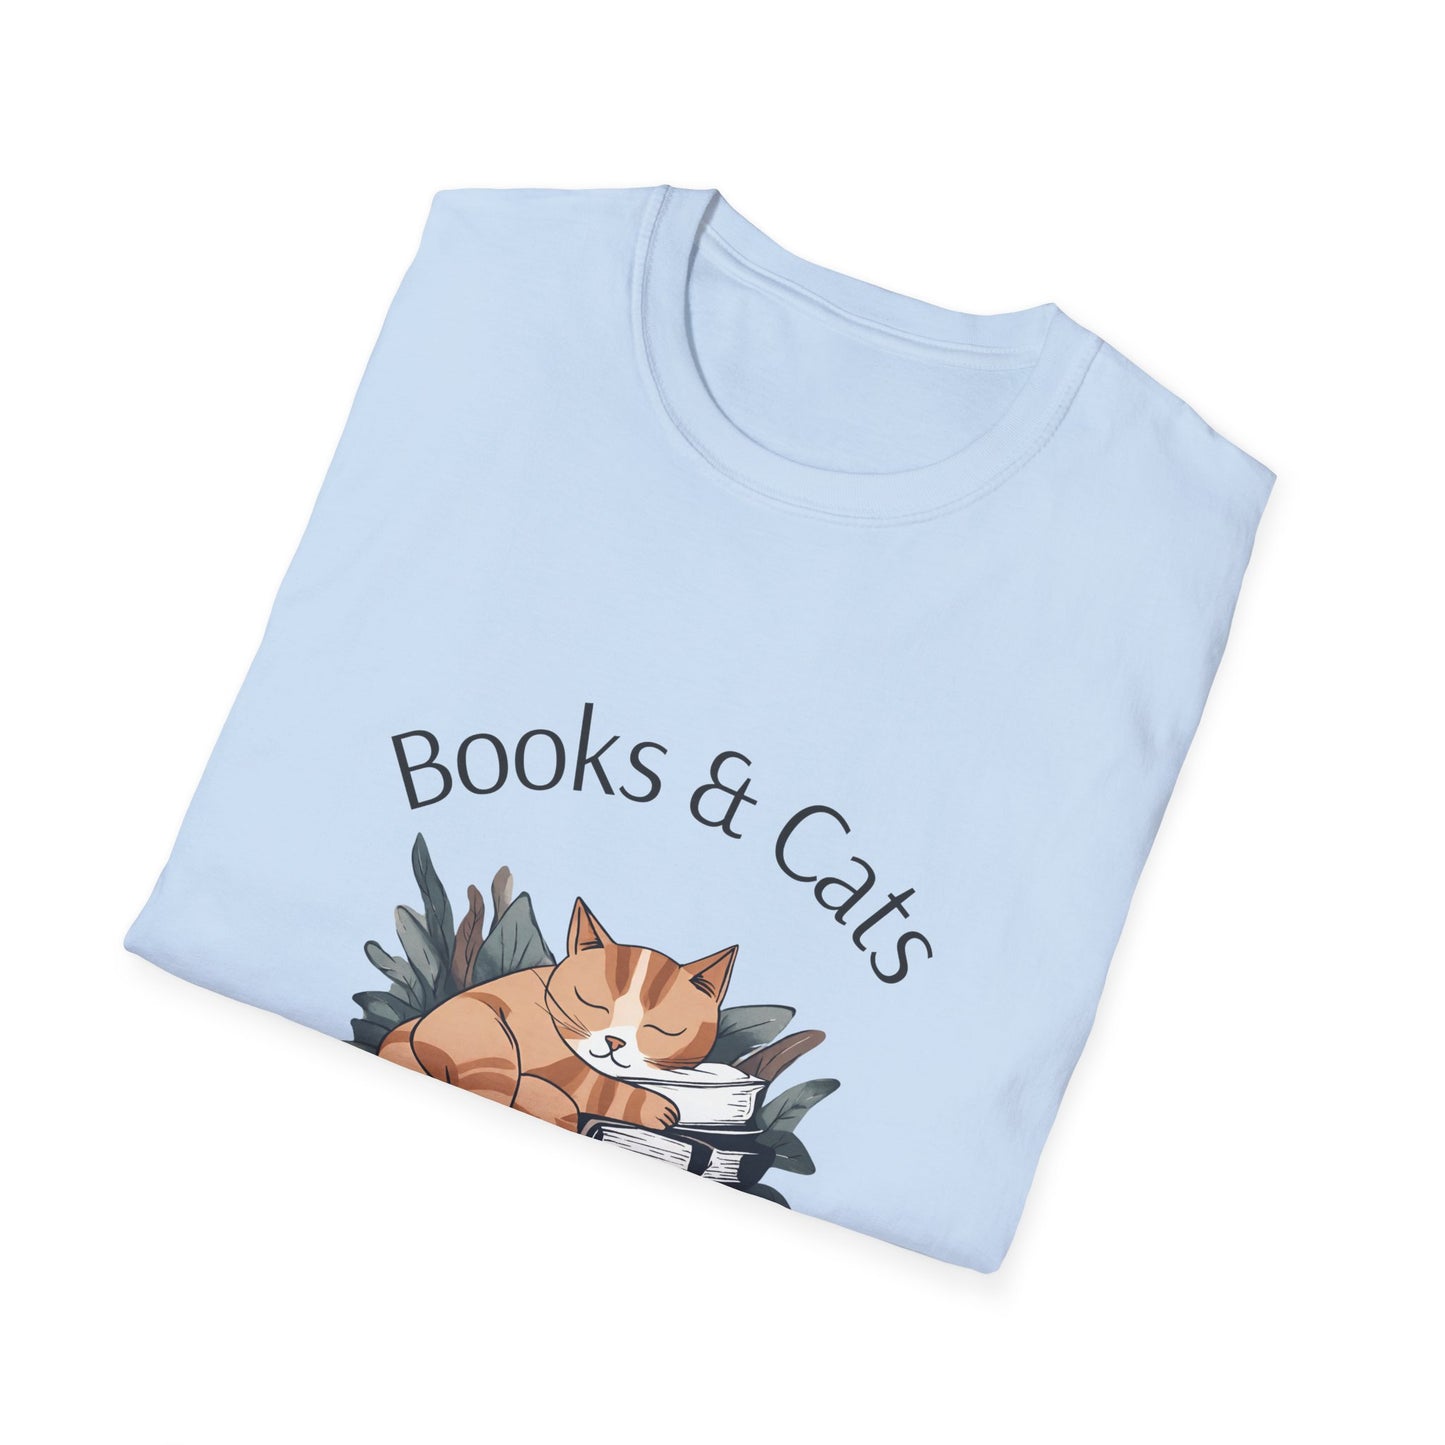 Books and Cats - A Perfect Pair"  - Unisex Softstyle T-Shirt